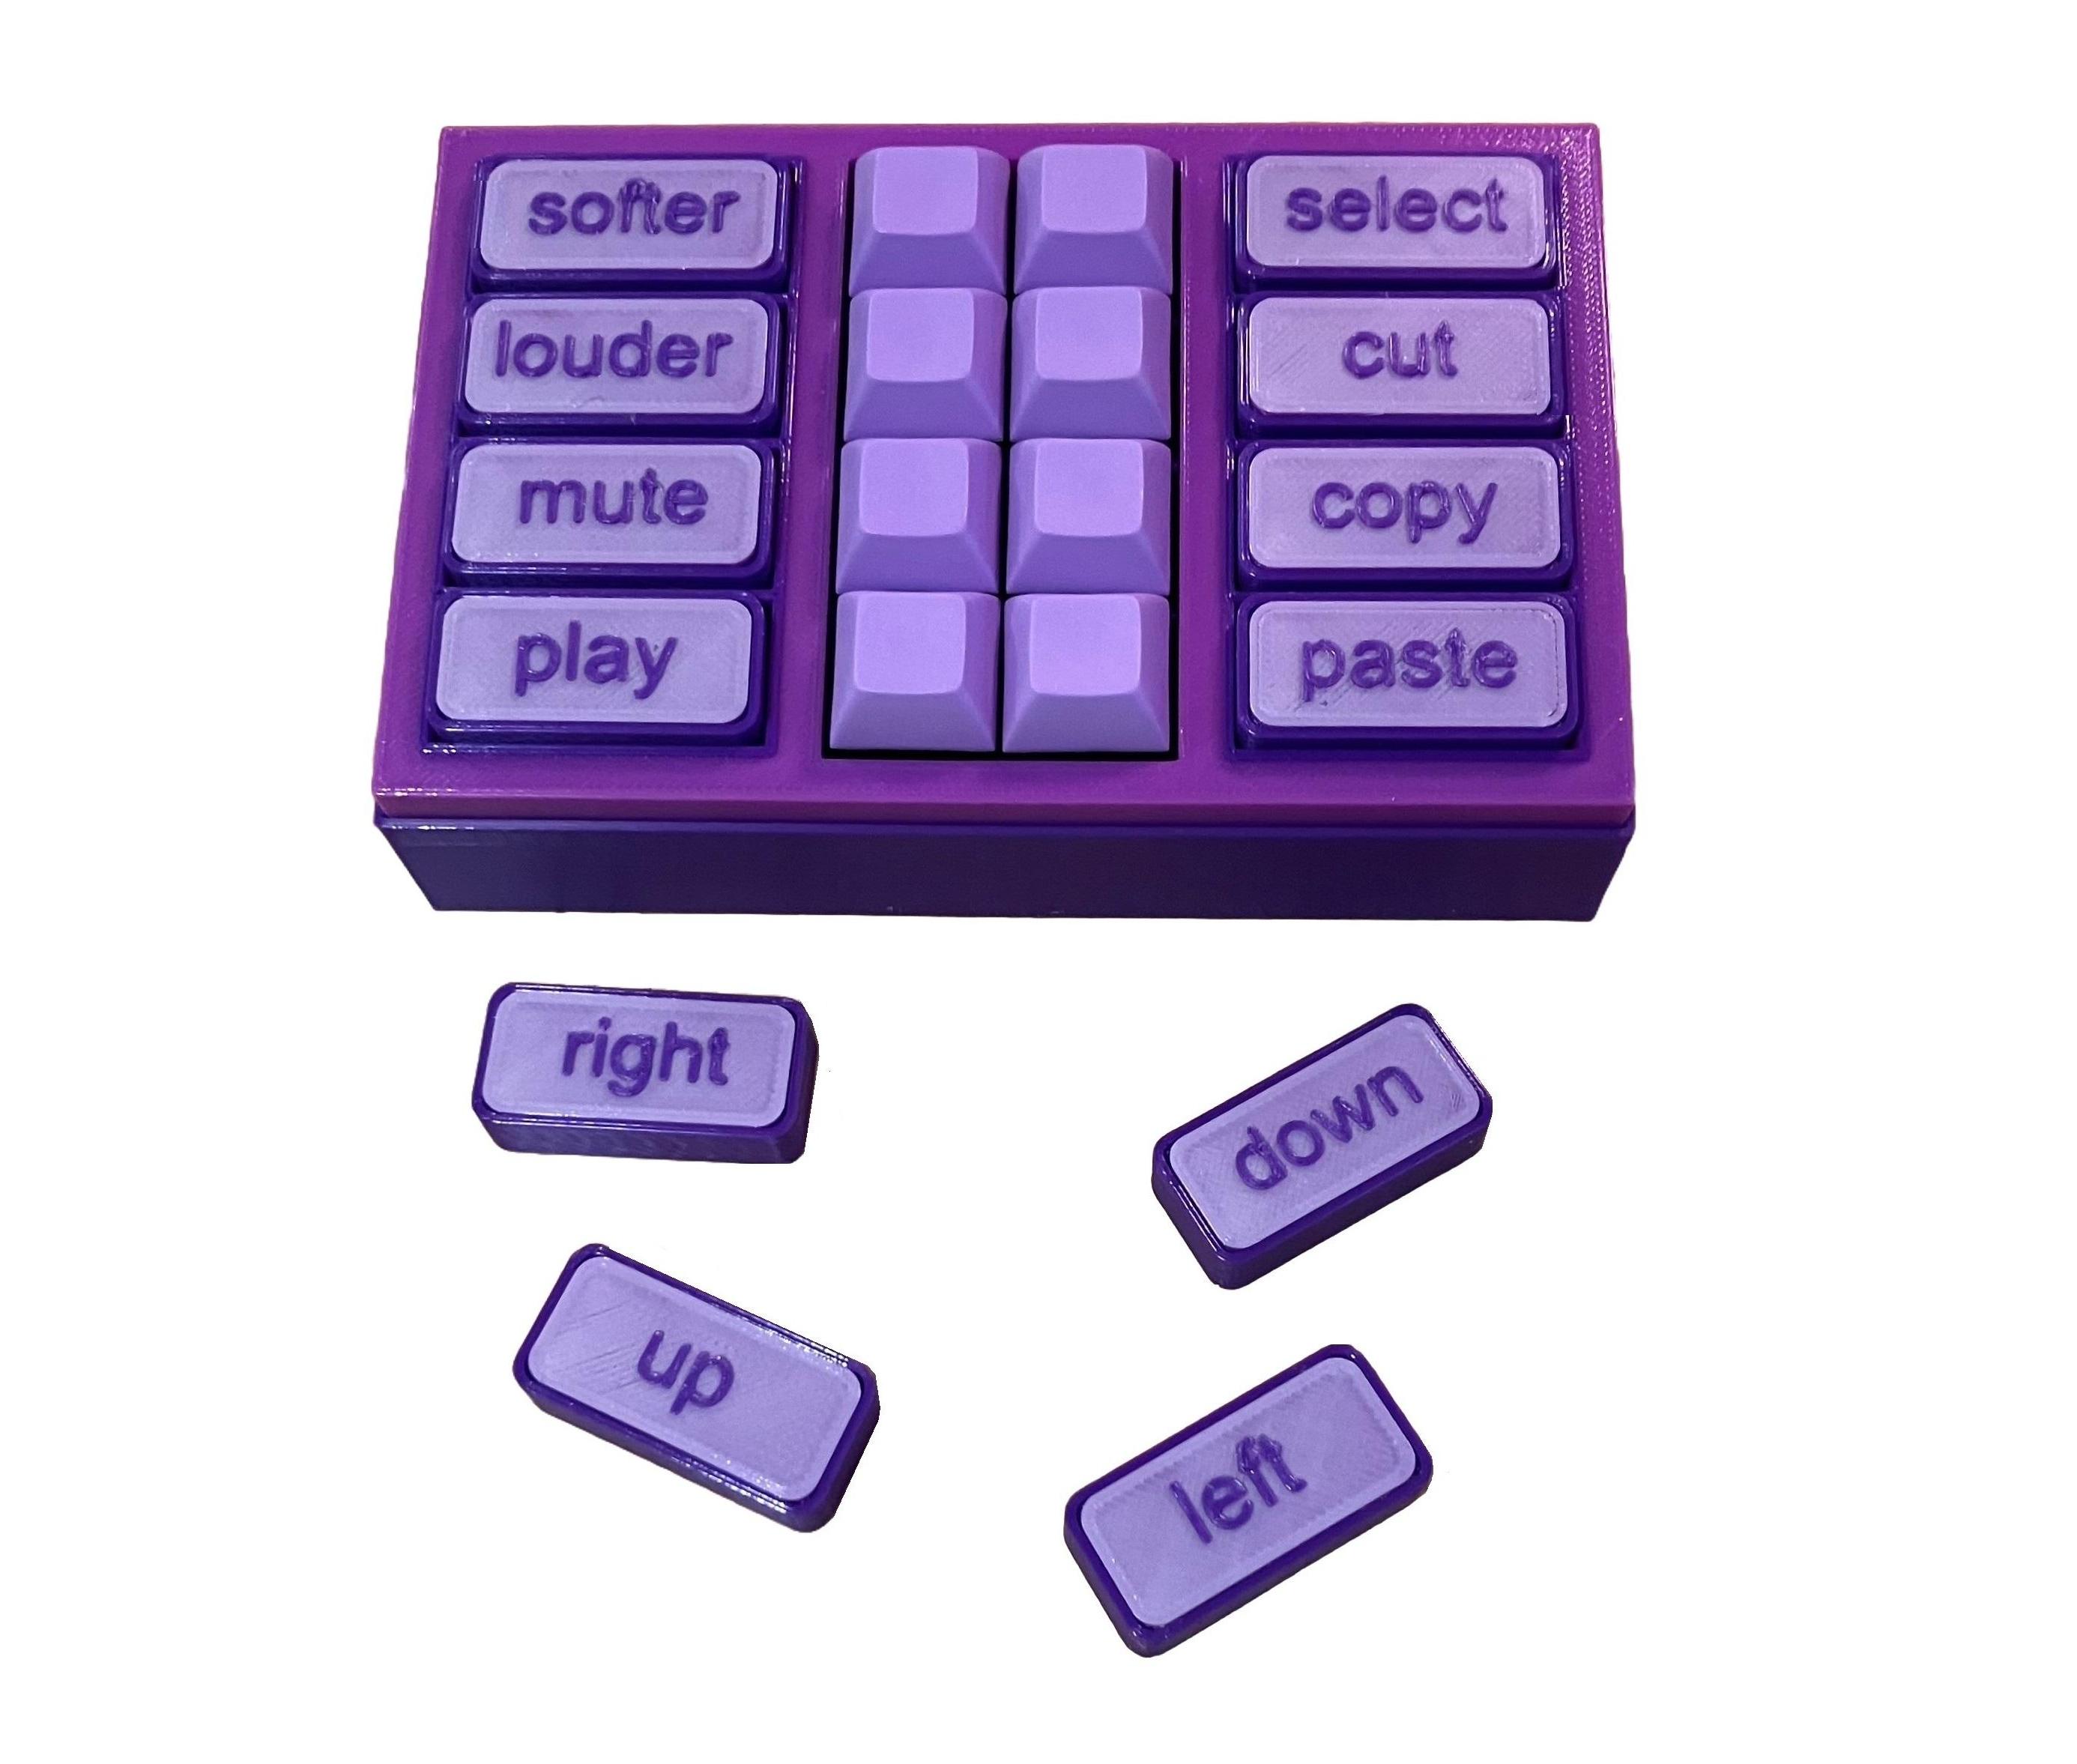 MacroPad With Tile Based Interface